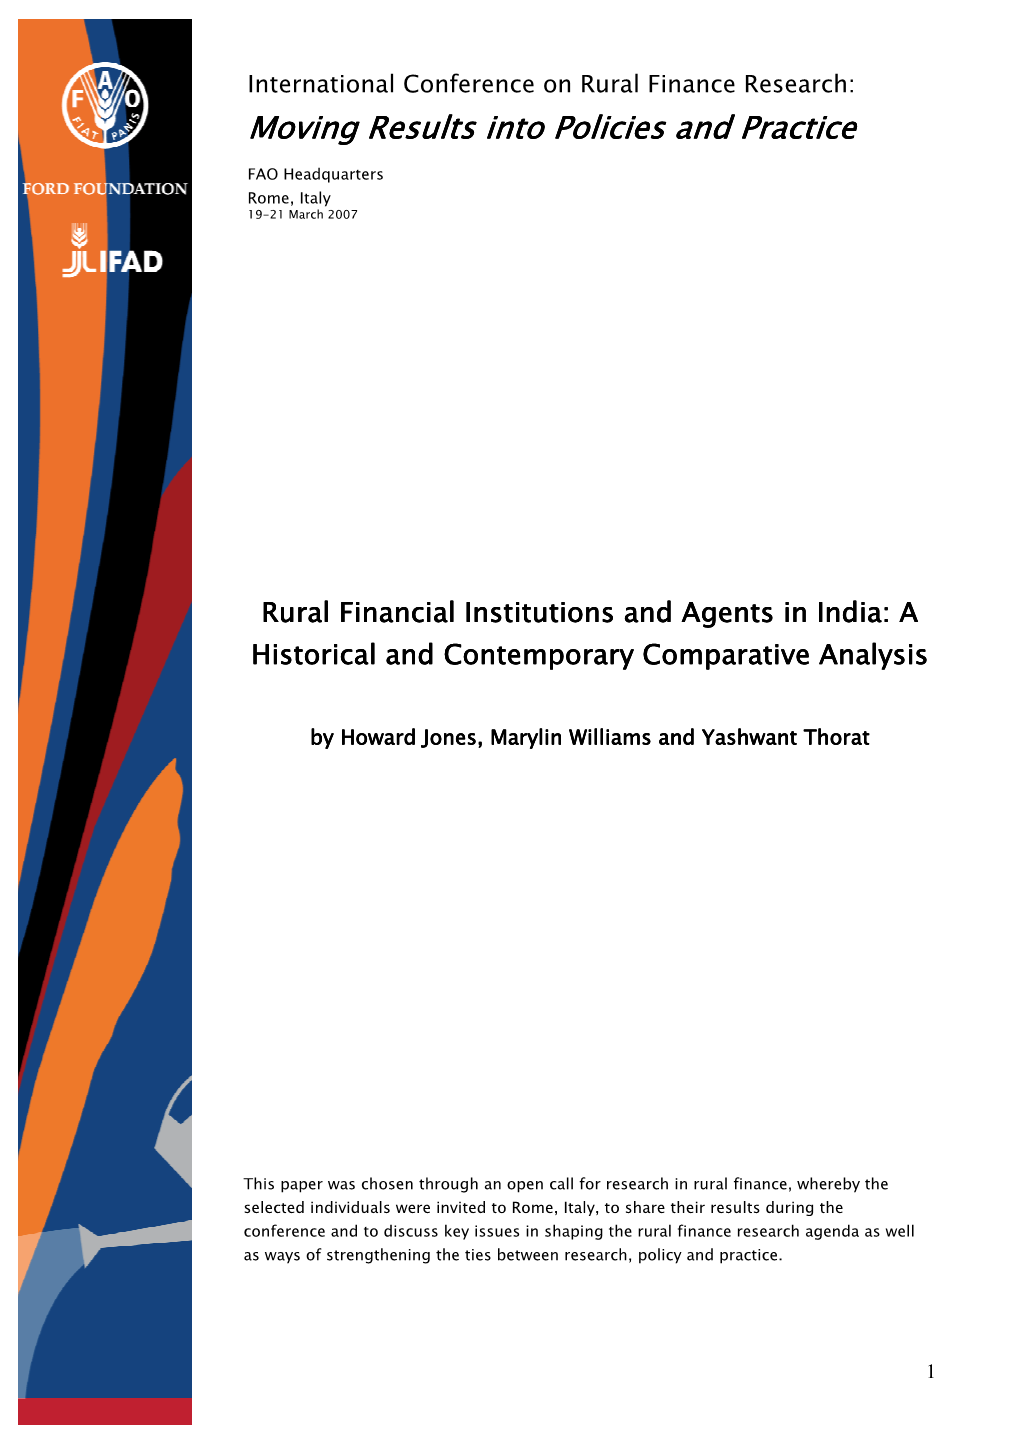 Rural Financial Institutions and Agents in India: a Historical and Contemporary Comparative Analysis